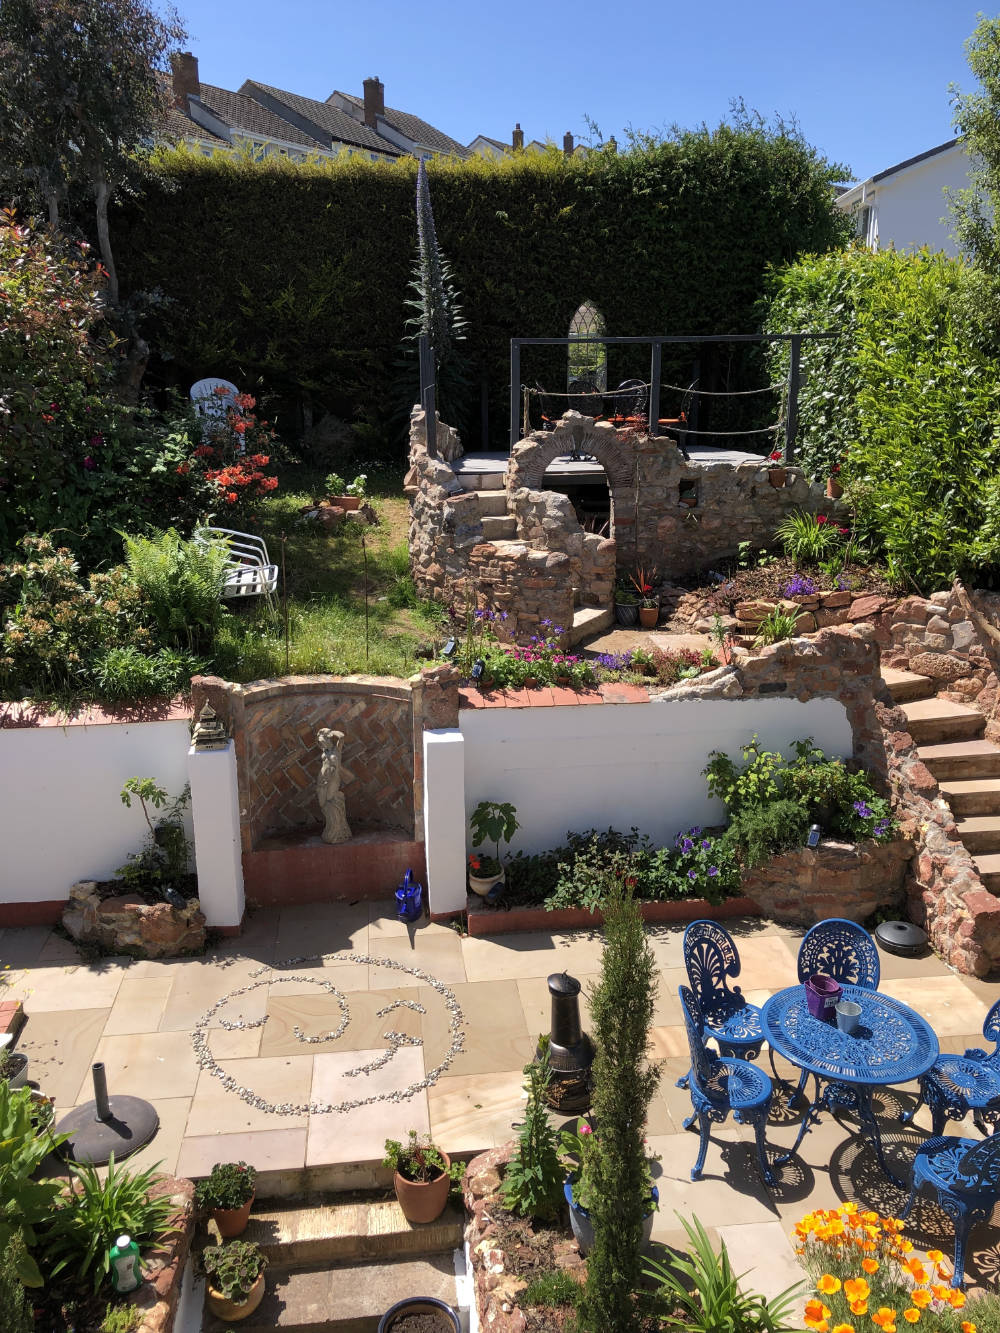 terraced garden with stone walls flowers and patio with George icon made of pebbles